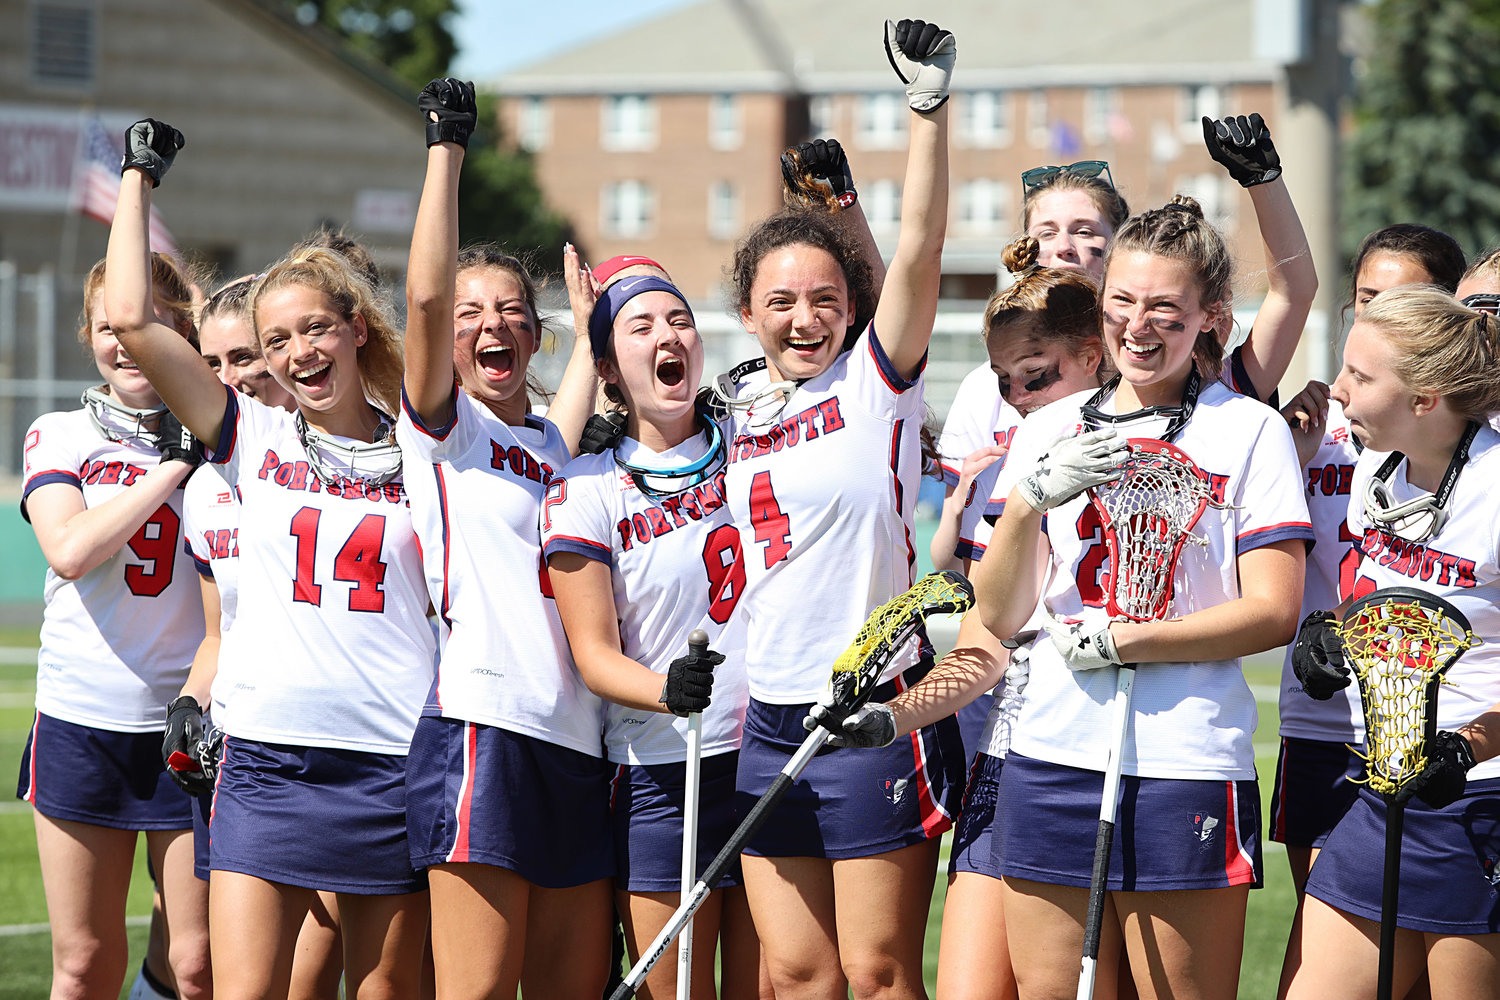 Members of the Portsmouth High School girls’ lacrosse team celebrate after beating Burrillville, 14-4, to capture the Division II state crown at Cranston Stadium on Sunday.